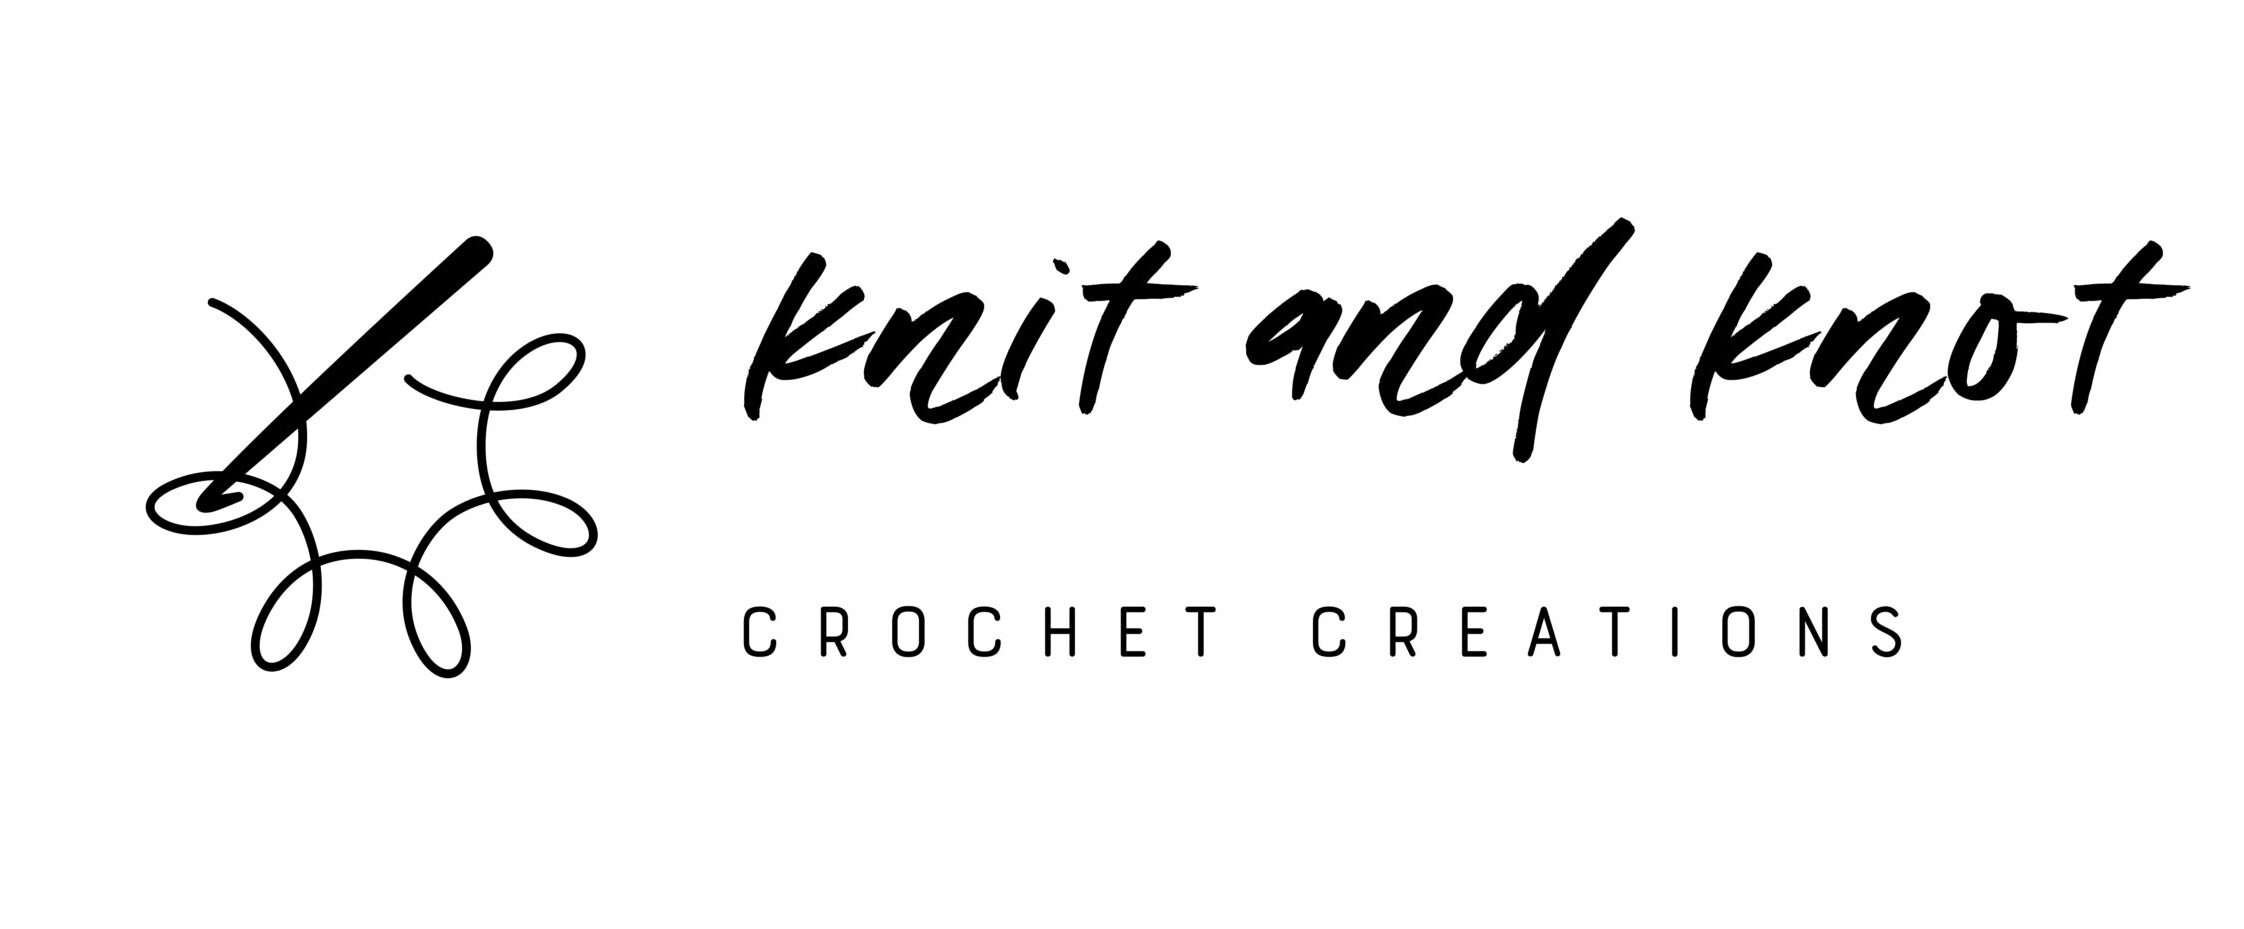 Knit and knot crochet creations